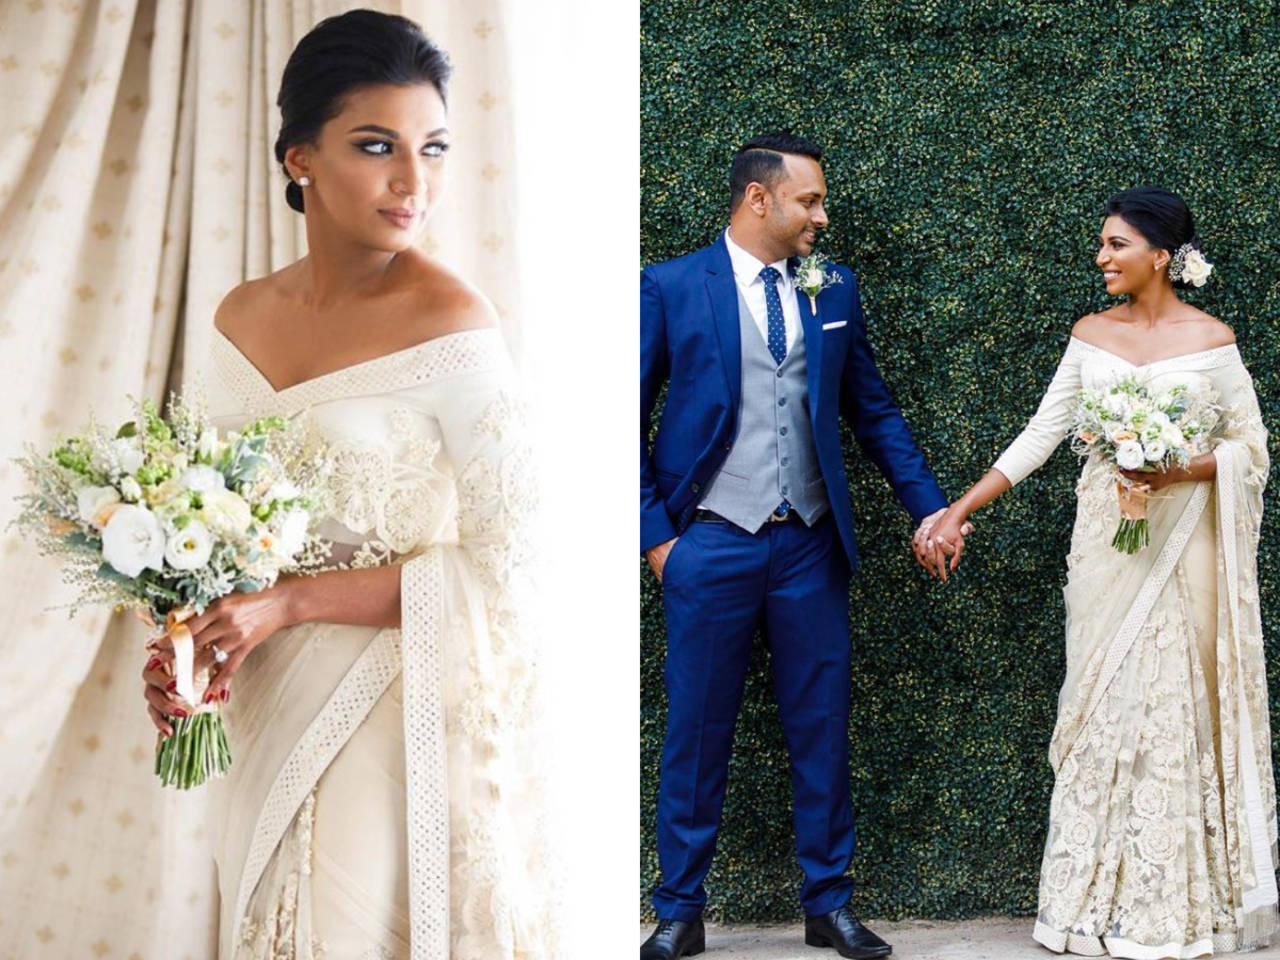 This Sri Lankan bride wore an off-white Indian sari for her wedding and she looked beautiful pic